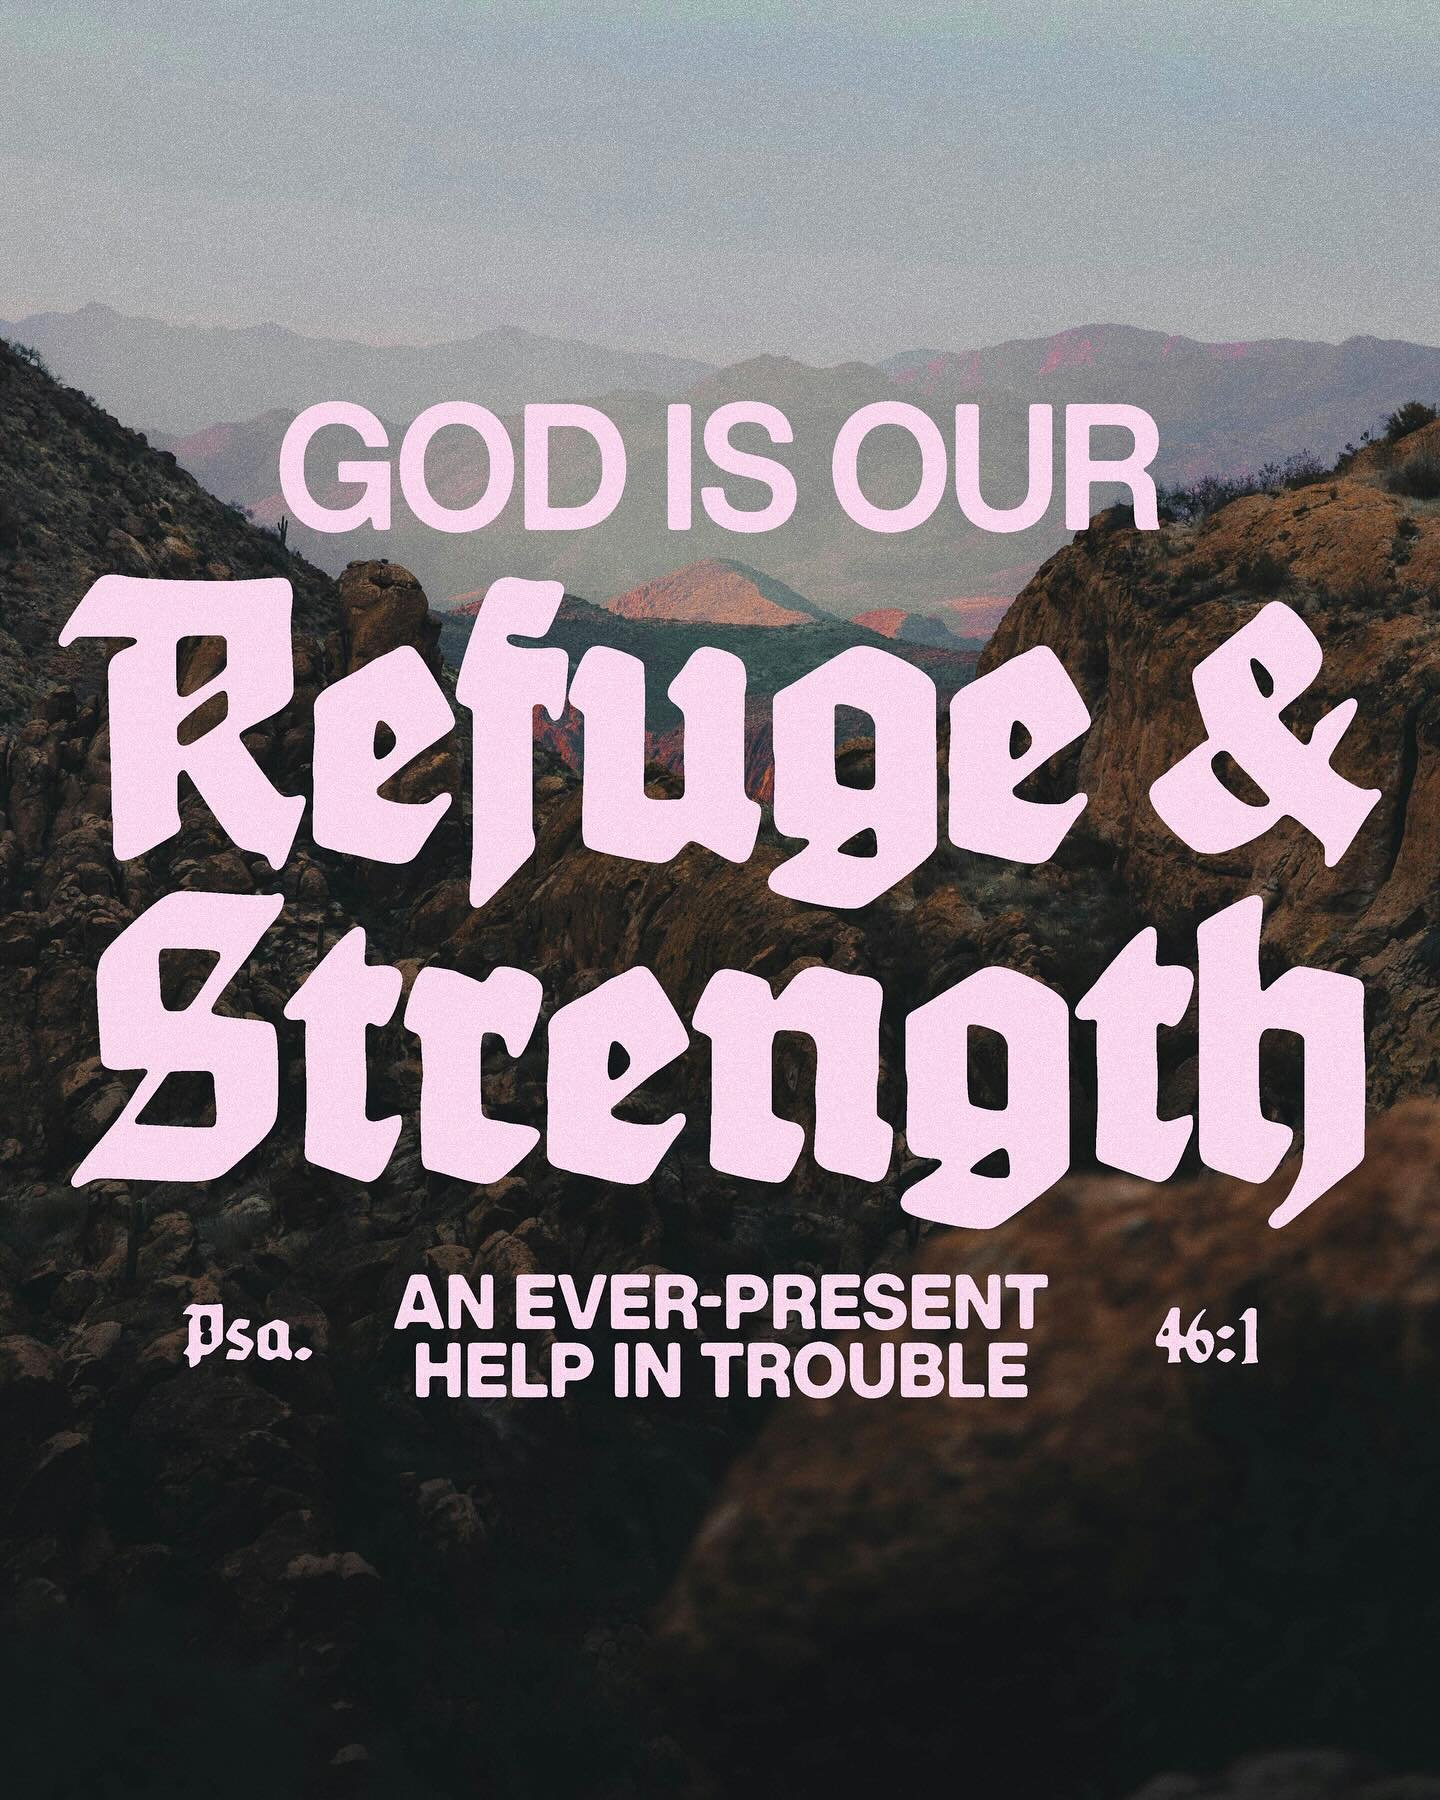 No matter what challenges we face, we can find refuge and strength in God. He is our rock and our fortress, a constant source of comfort and hope in a world that can be unpredictable. When we put our trust in Him, we can face any situation with coura